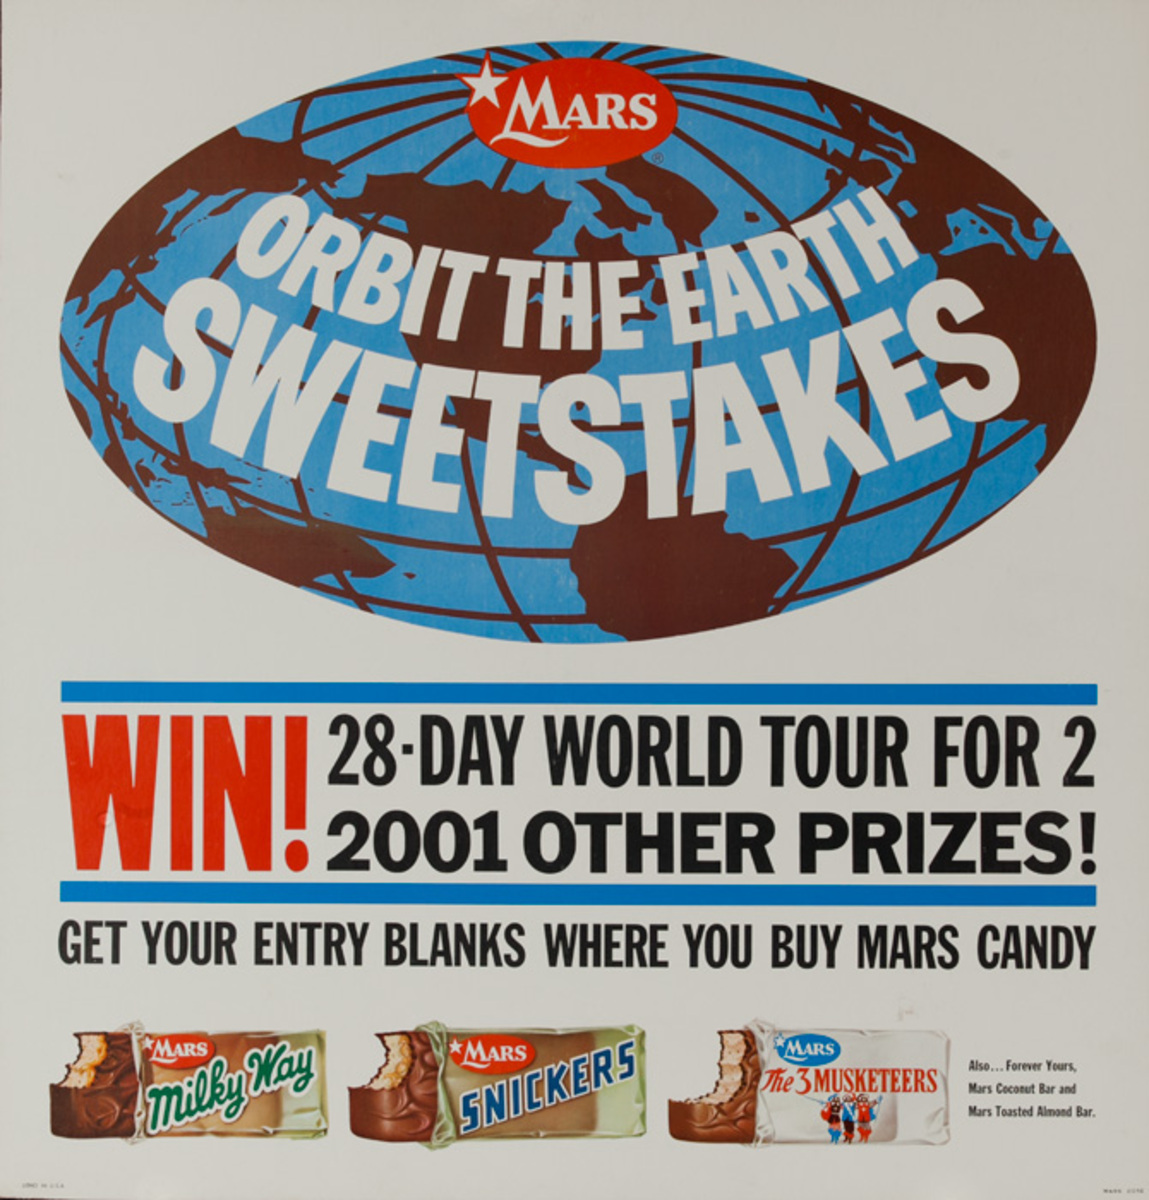 Mars Candy Original Advertising Poster, Orbit the Earth Sweepstakes